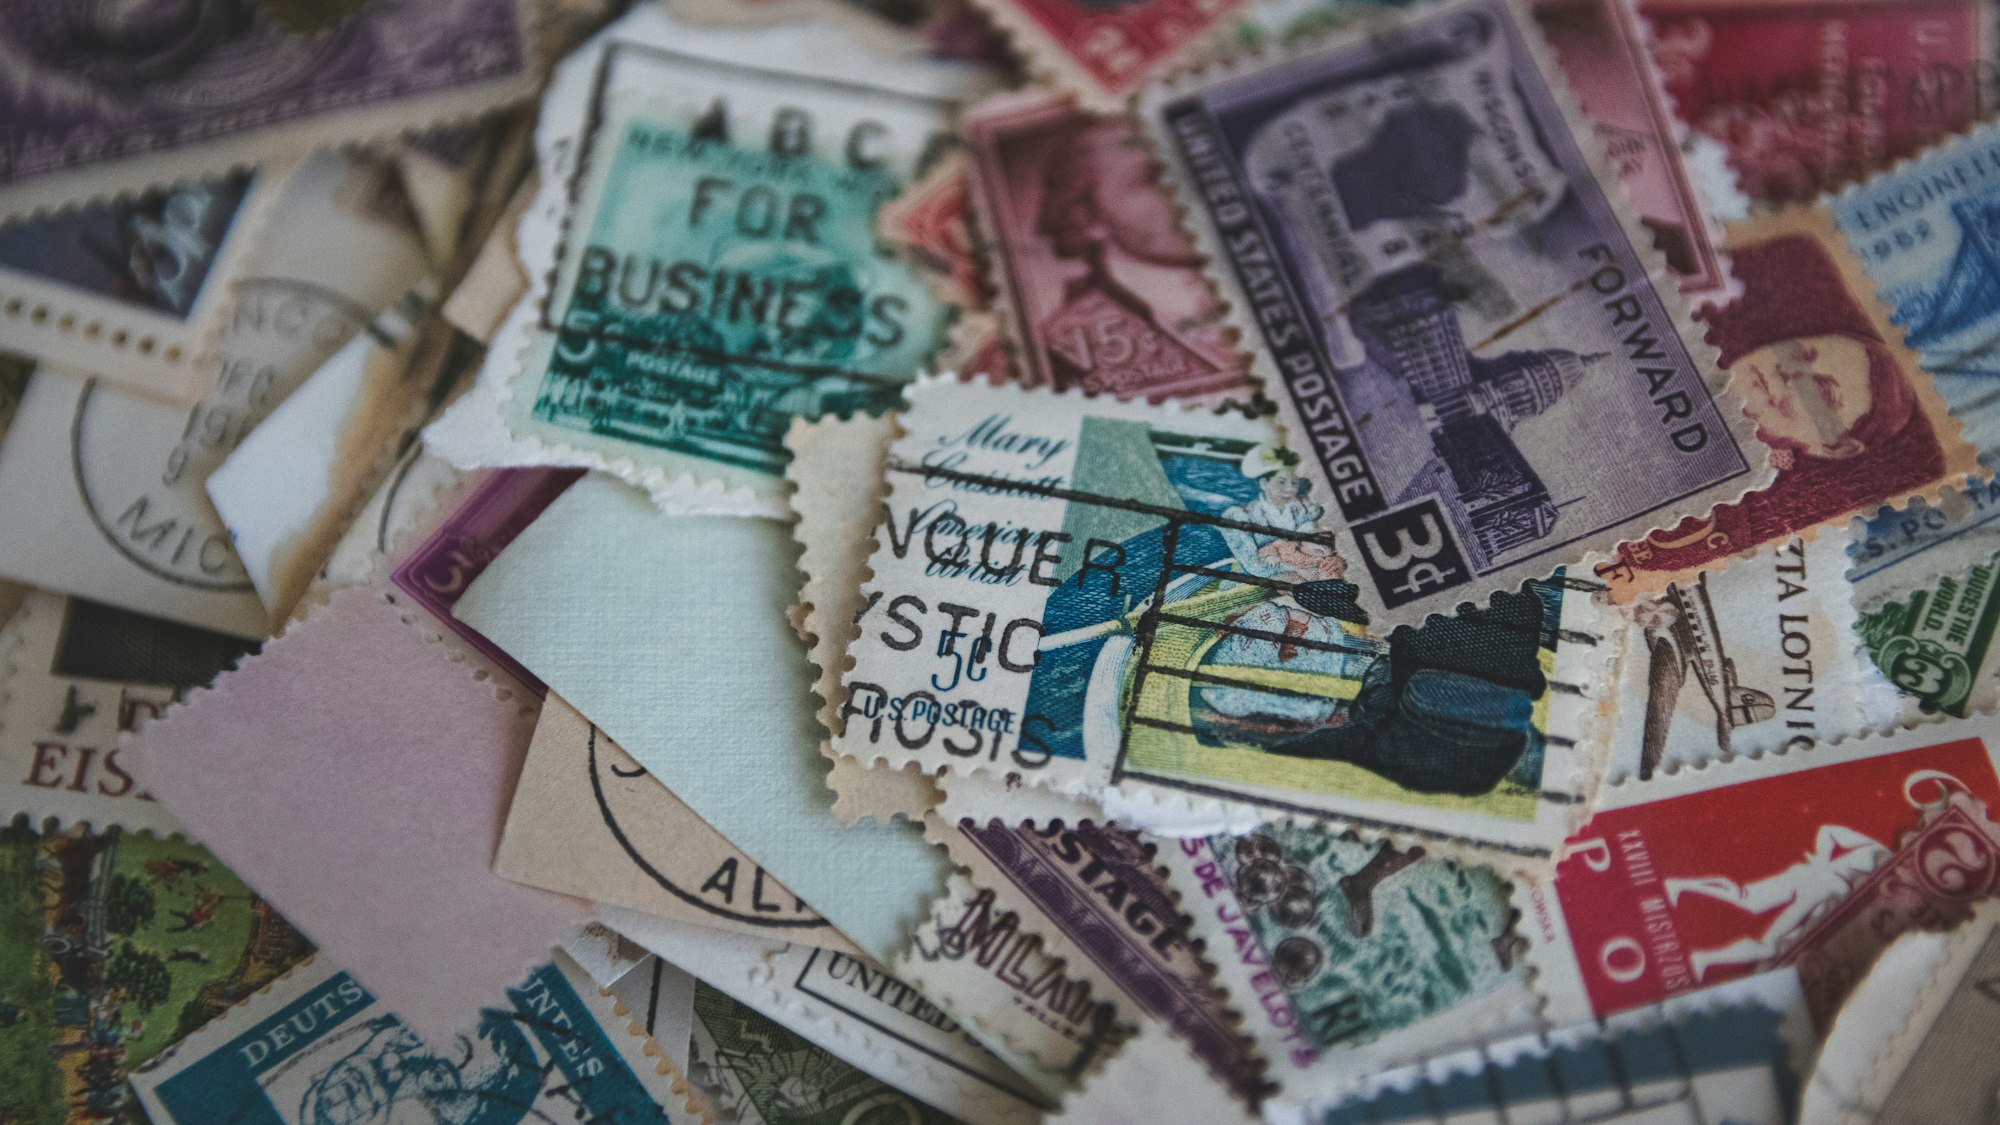 Classic and old stamps from a family stamp collection.